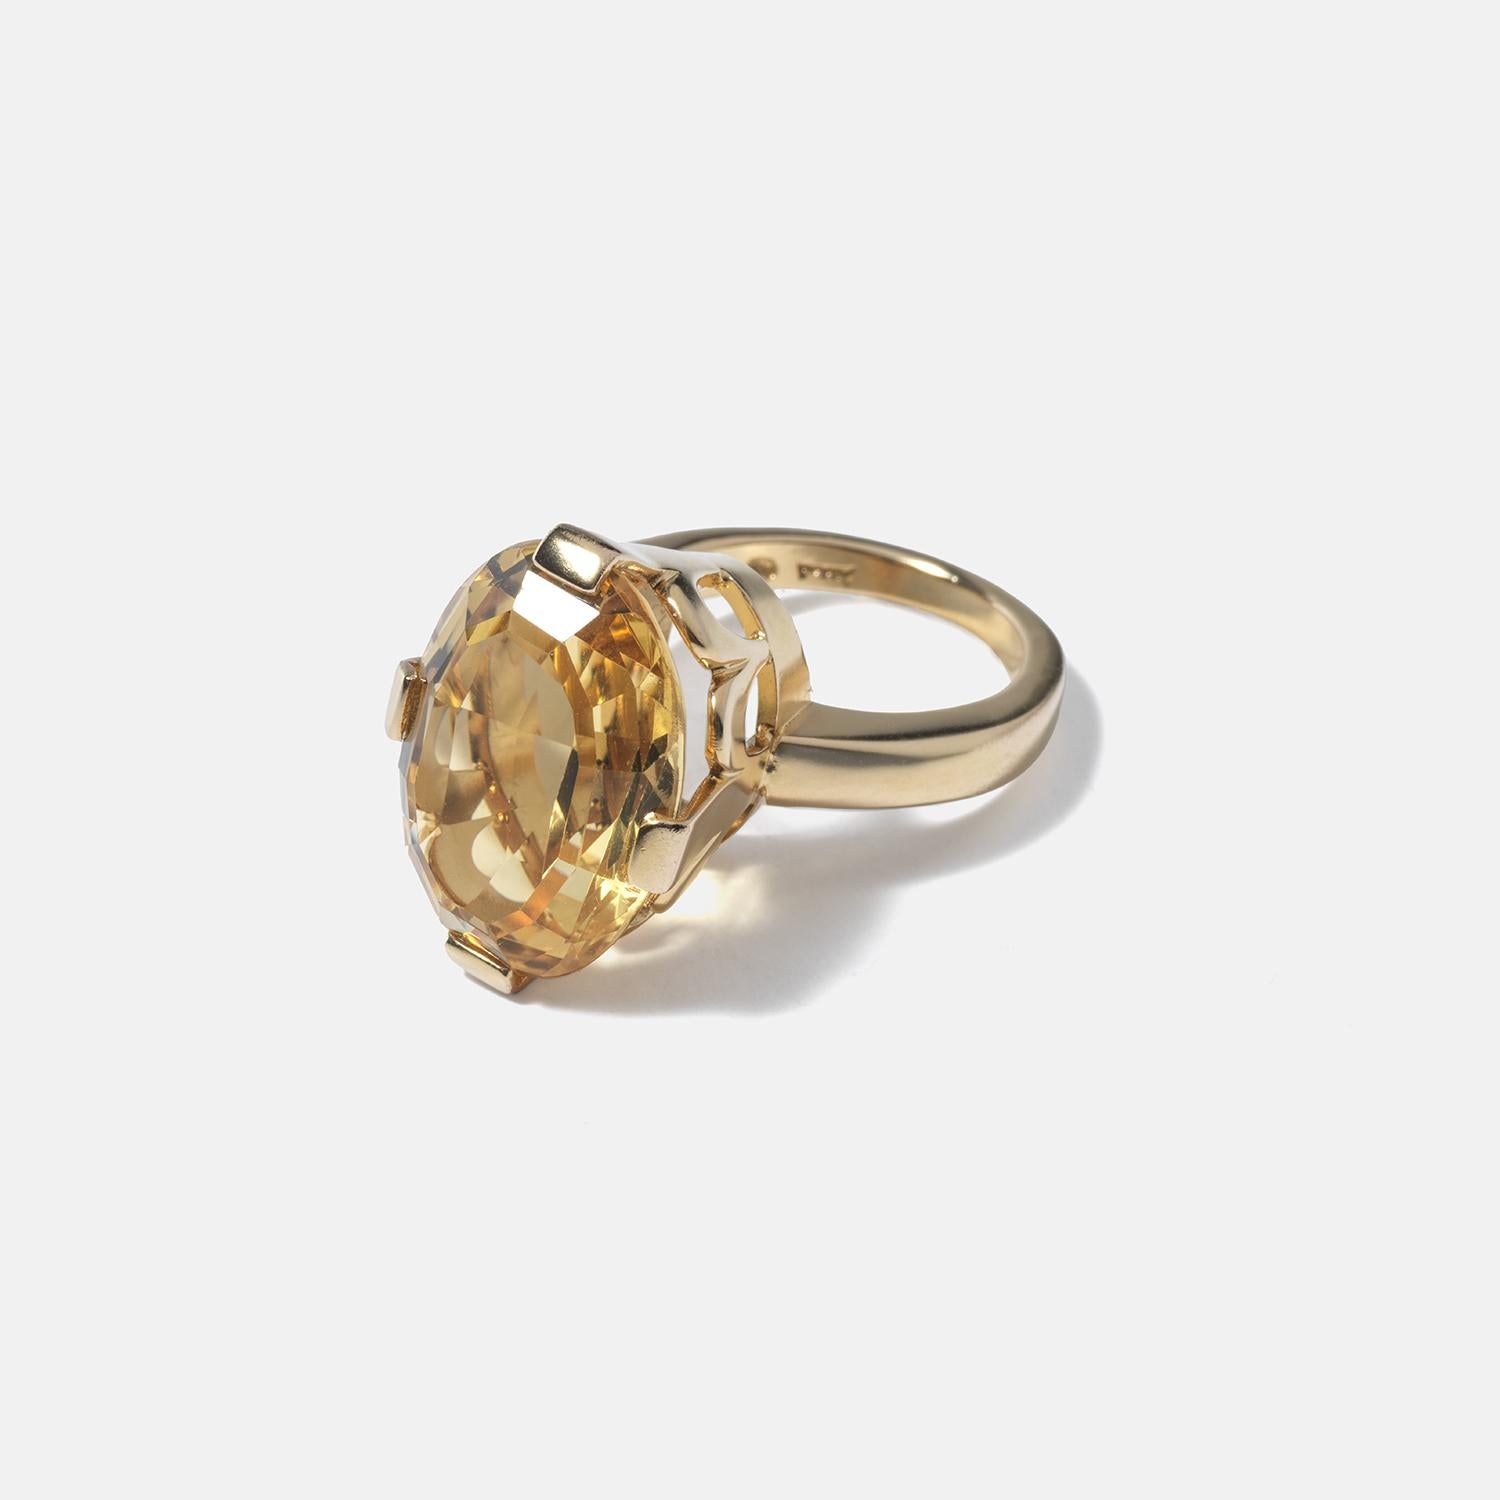 Vintage 18k Gold and Citrine Ring Made Year 1972 In Good Condition For Sale In Stockholm, SE